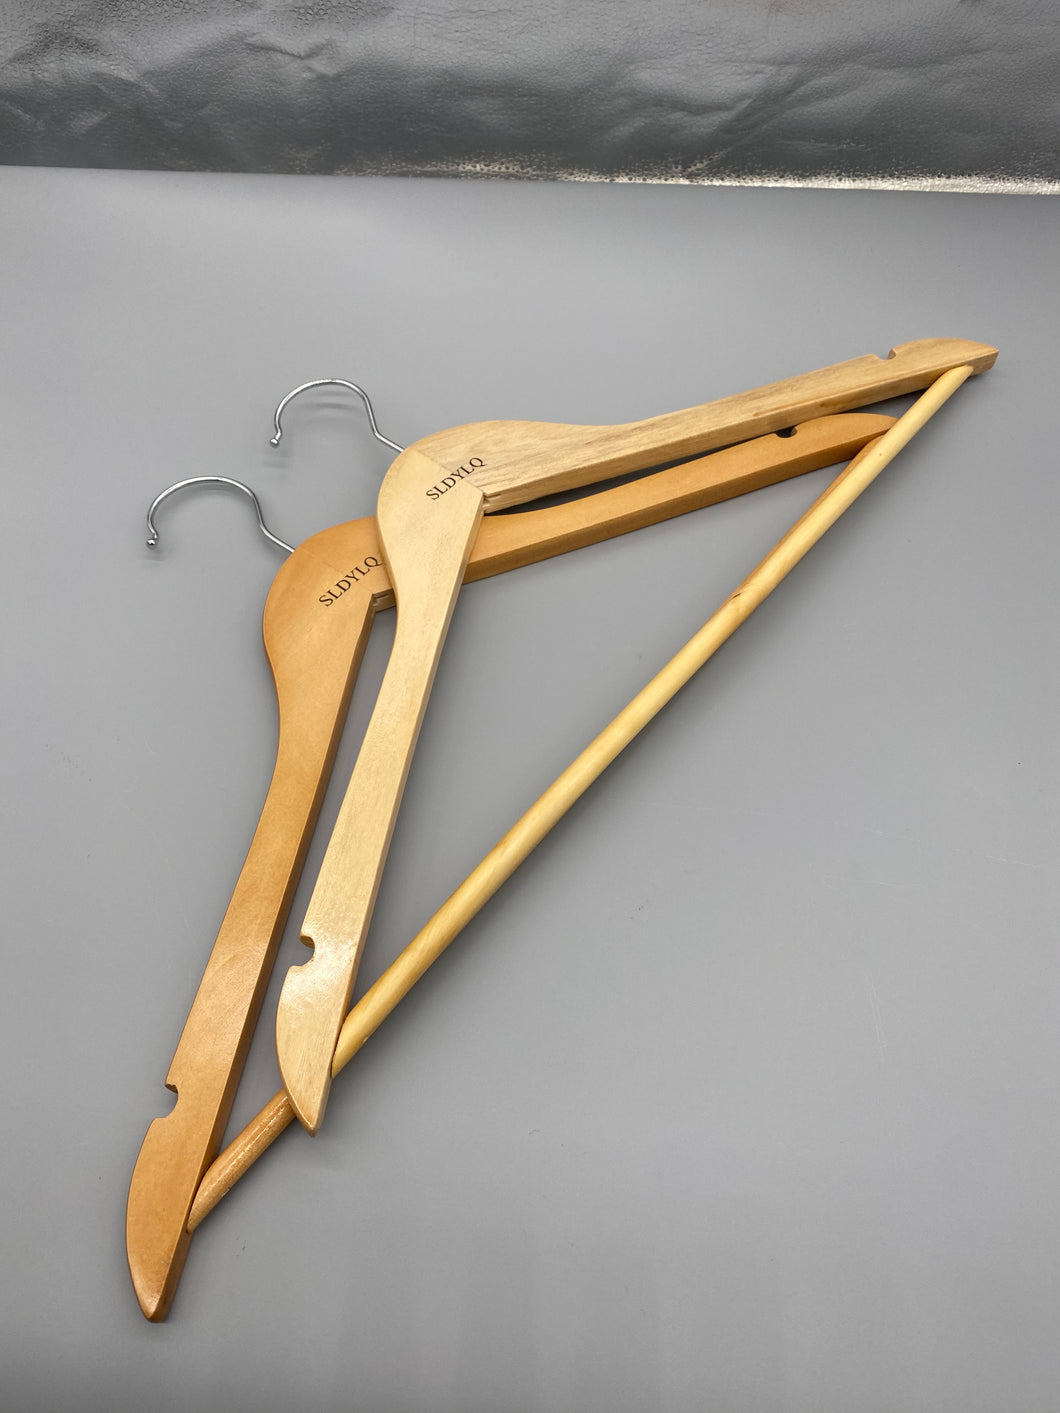 SLDYLQ Clothes hangers,Solid Wood Suit Hangers - 20 Pack - with Non Slip Bar and Precisely Cut Notches - 360 Degree Swivel Chrome Hook - Natural Finish Super Sturdy and Durable Wooden Hangers.